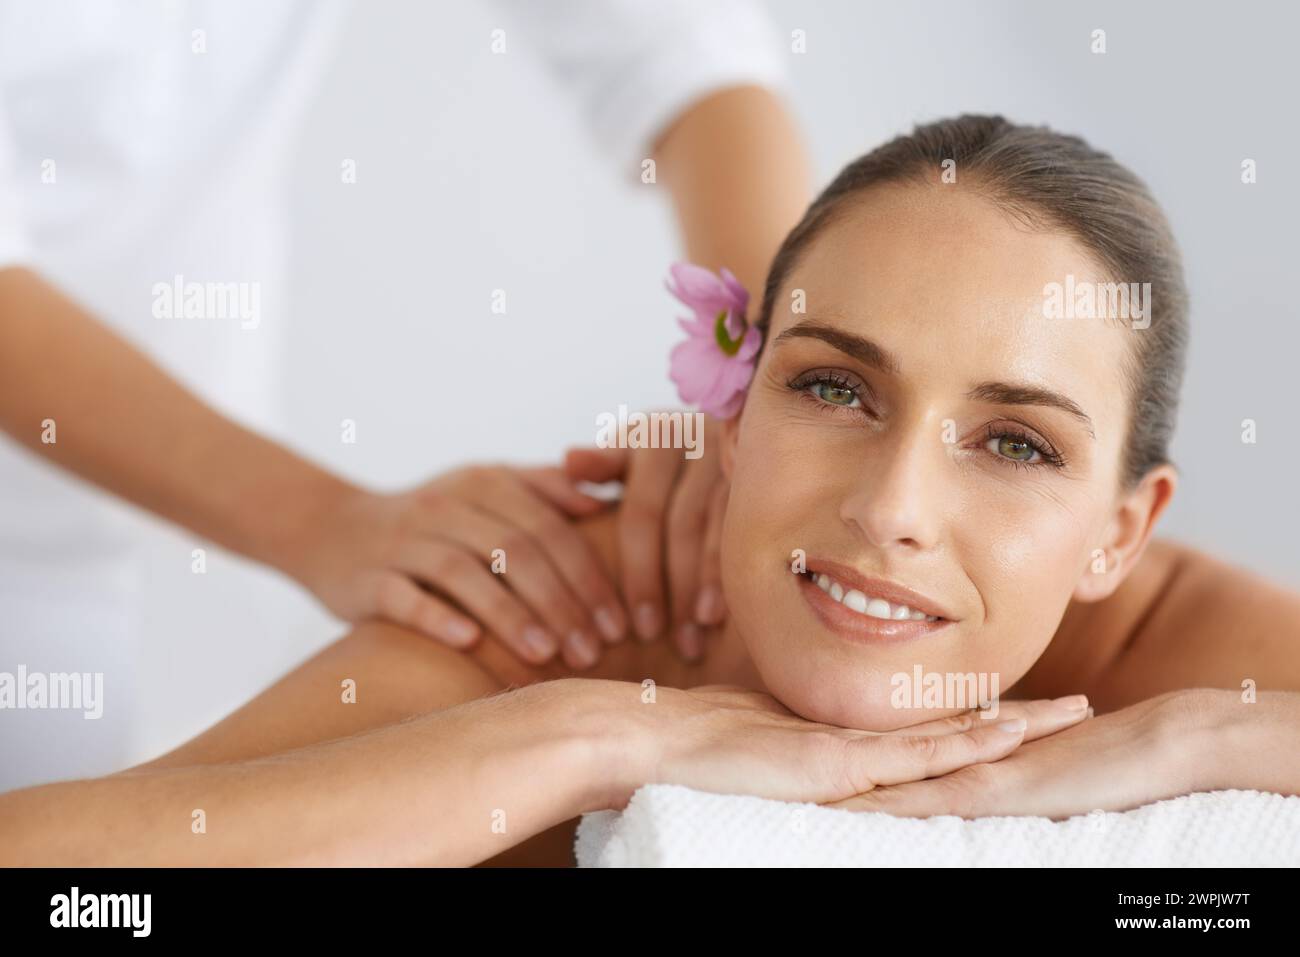 Relax, massage and portrait of woman at spa for health, wellness and balance with luxury holistic treatment. Self care, peace and girl on table for Stock Photo